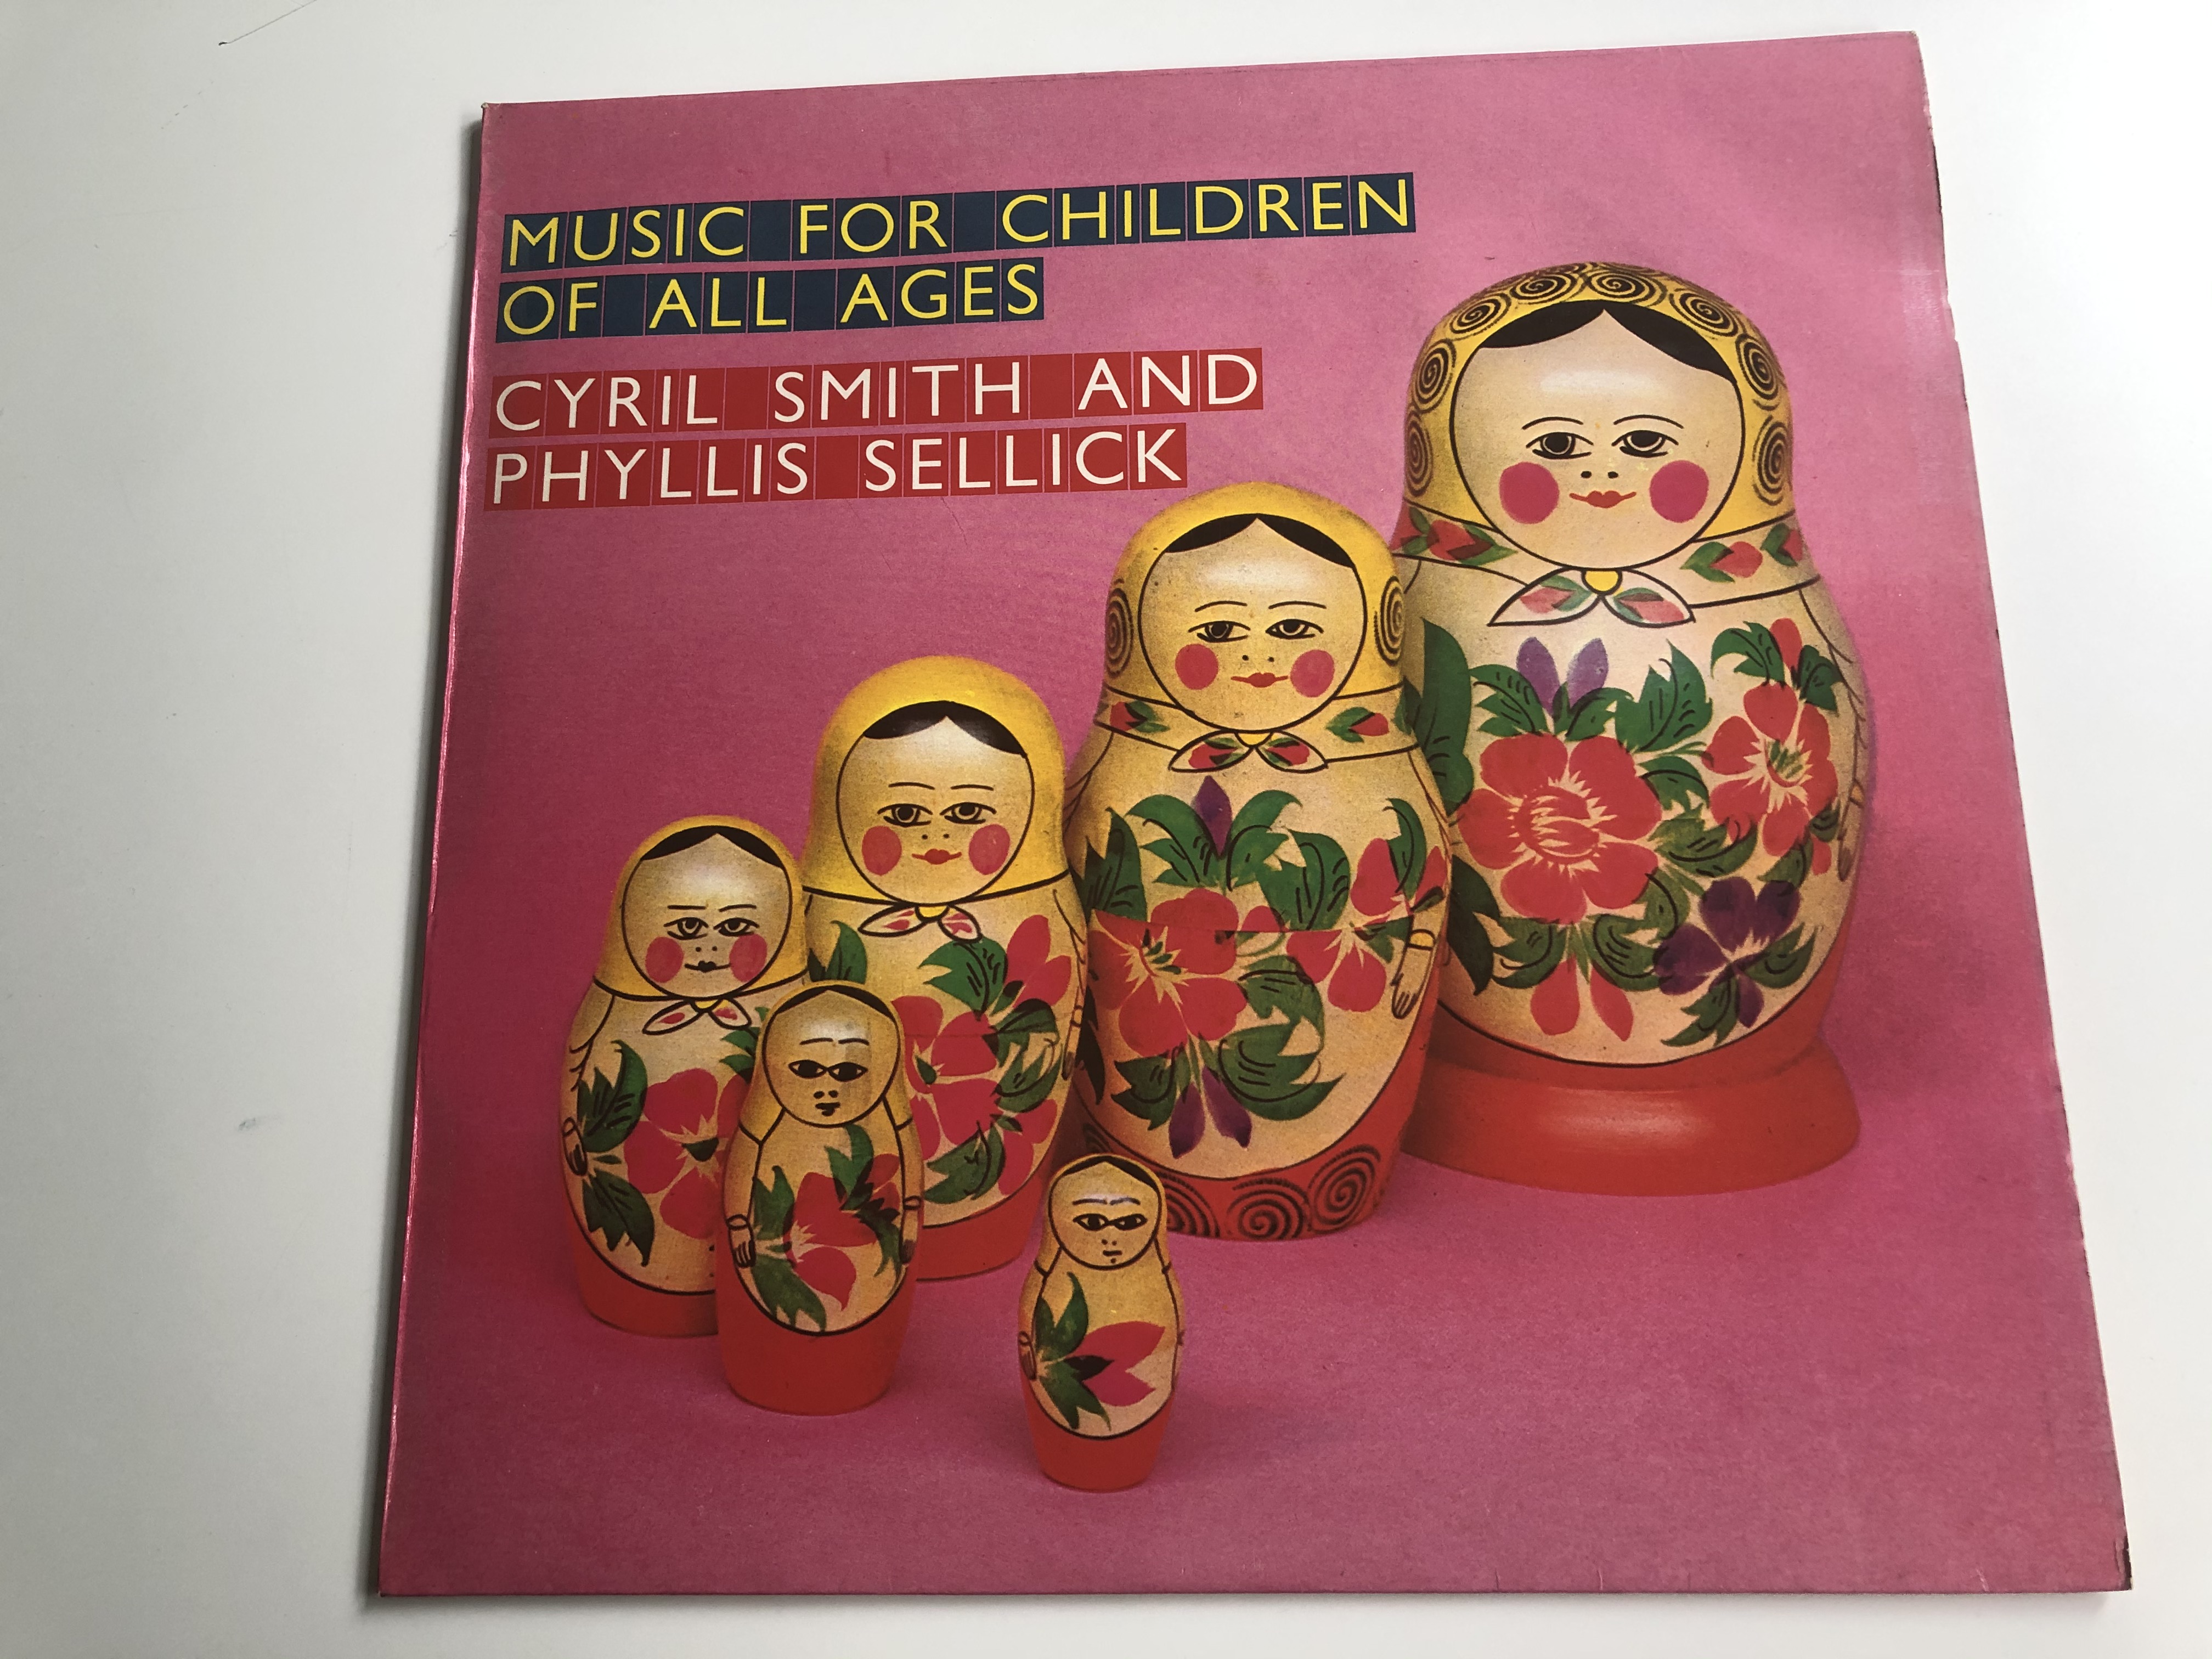 music-for-children-of-all-ages-cyril-smith-and-phyllis-sellick-polydor-lp-stereo-2460-232-1-.jpg